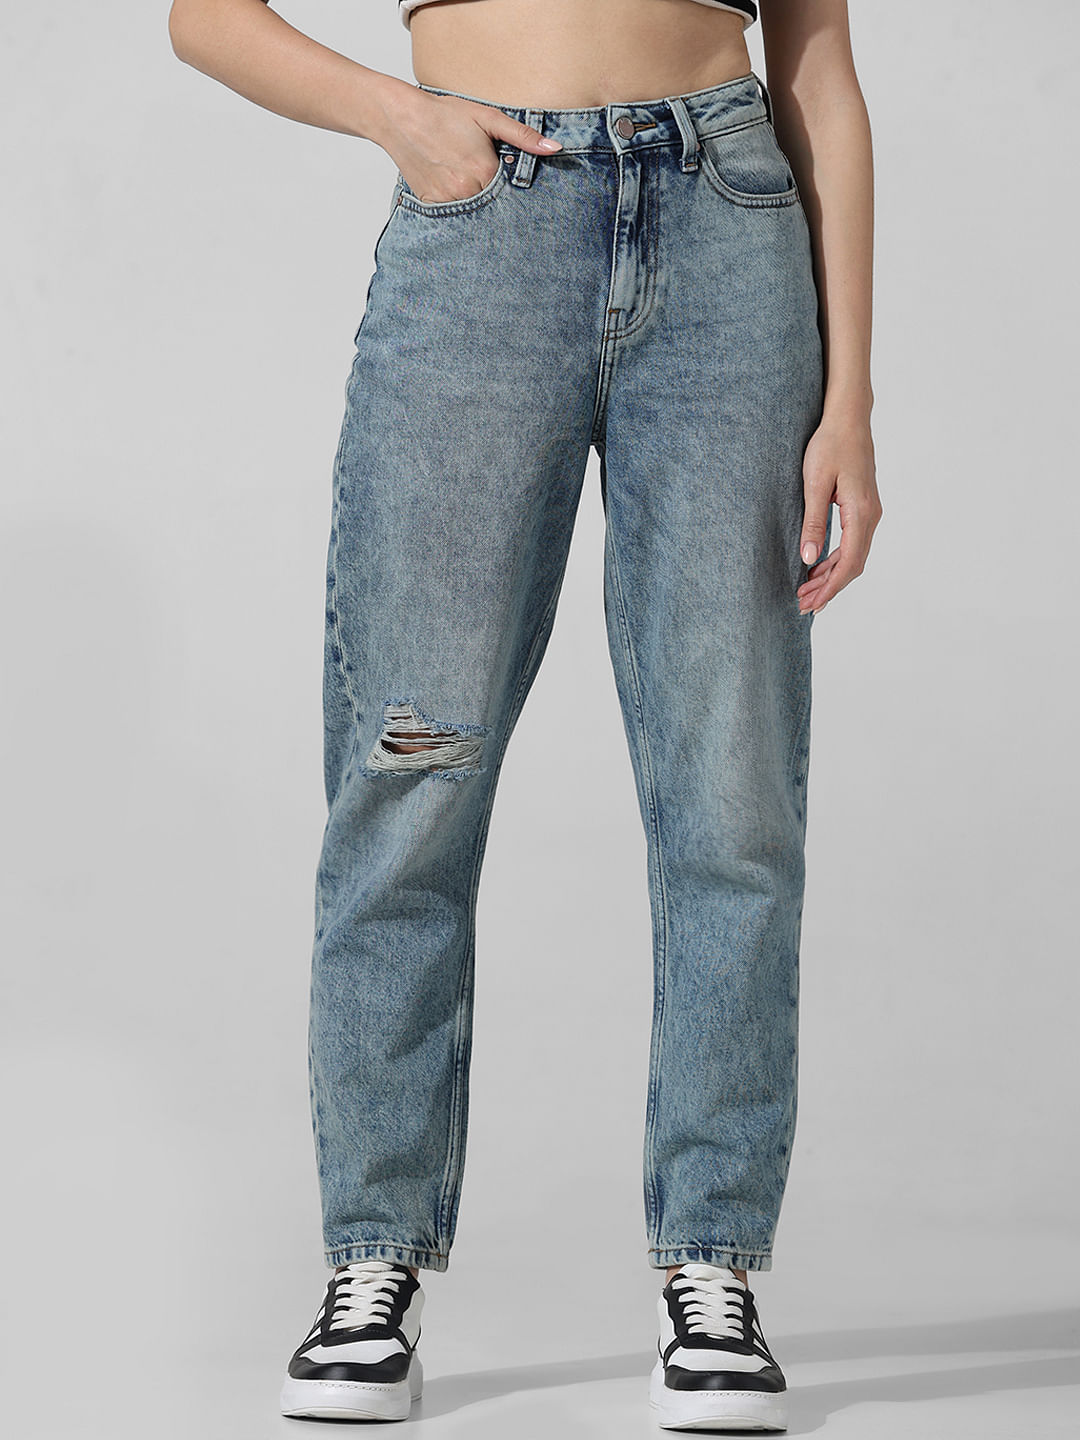 Light Blue High Rise Distressed Carrot Fit Jeans